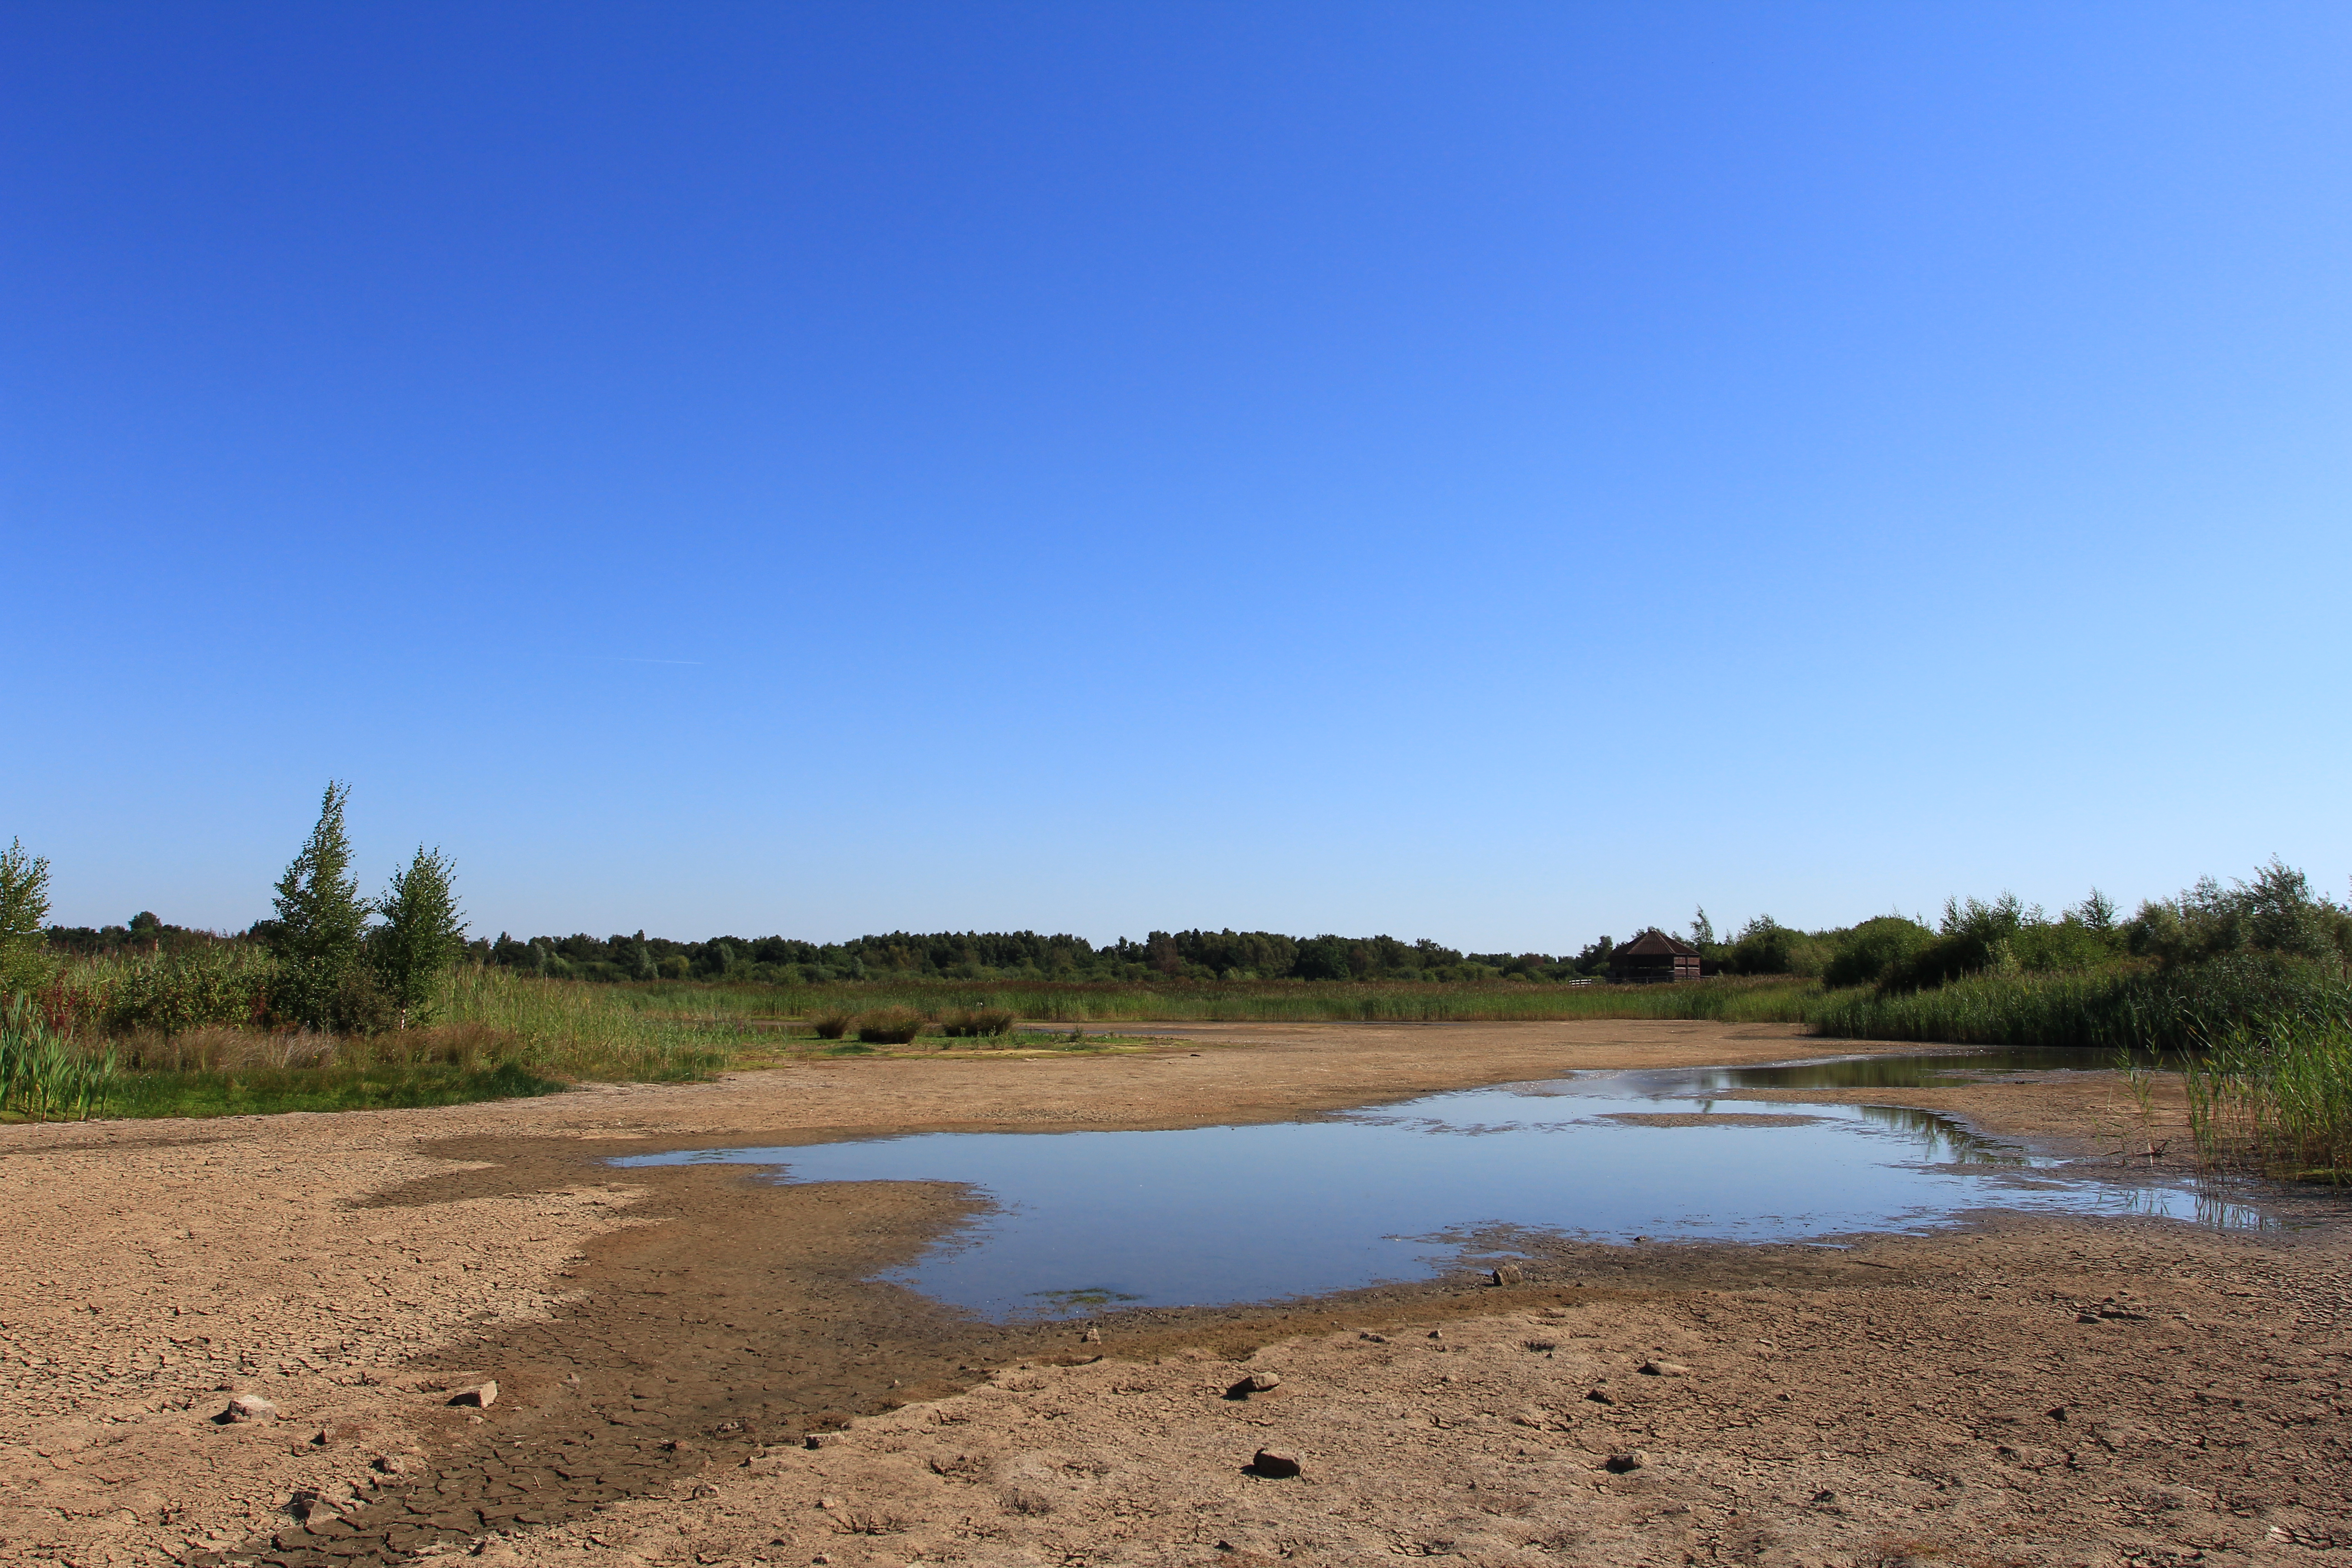 Huxterwell Marsh at Potteric Carr nature reserve near completely dry (Jim Horsfall/Widllife Trusts/PA)